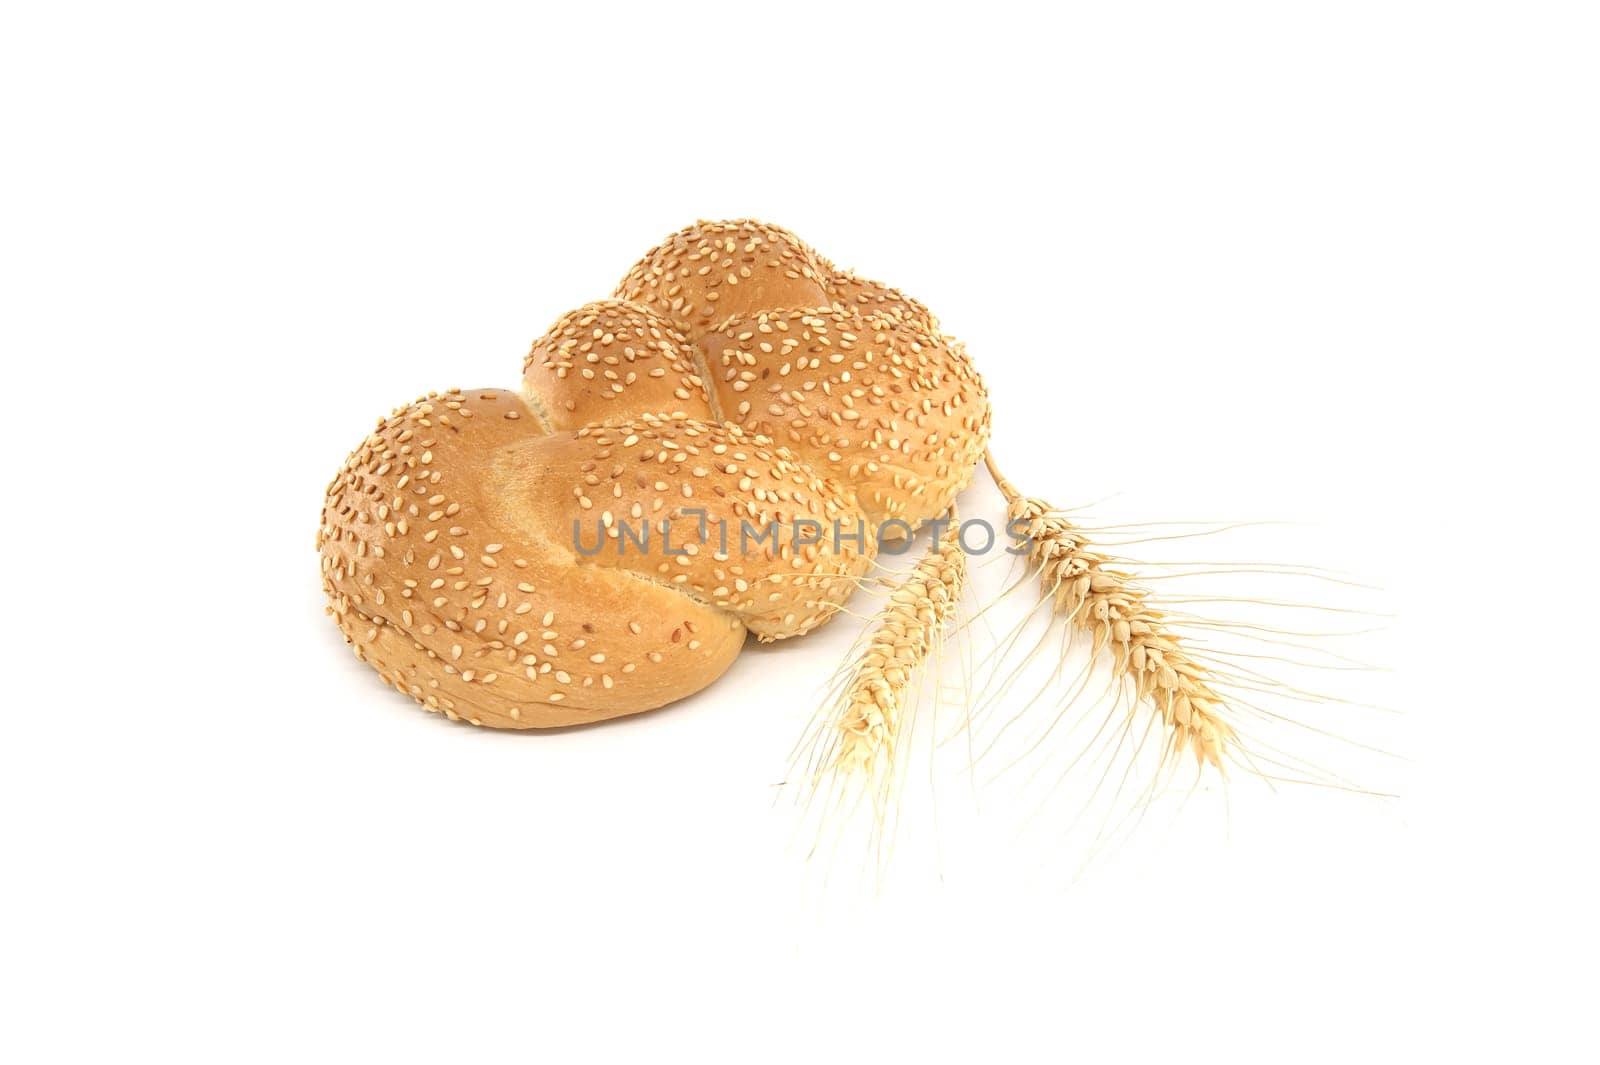 Golden braided sesame bread and a stalks of wheat by NetPix